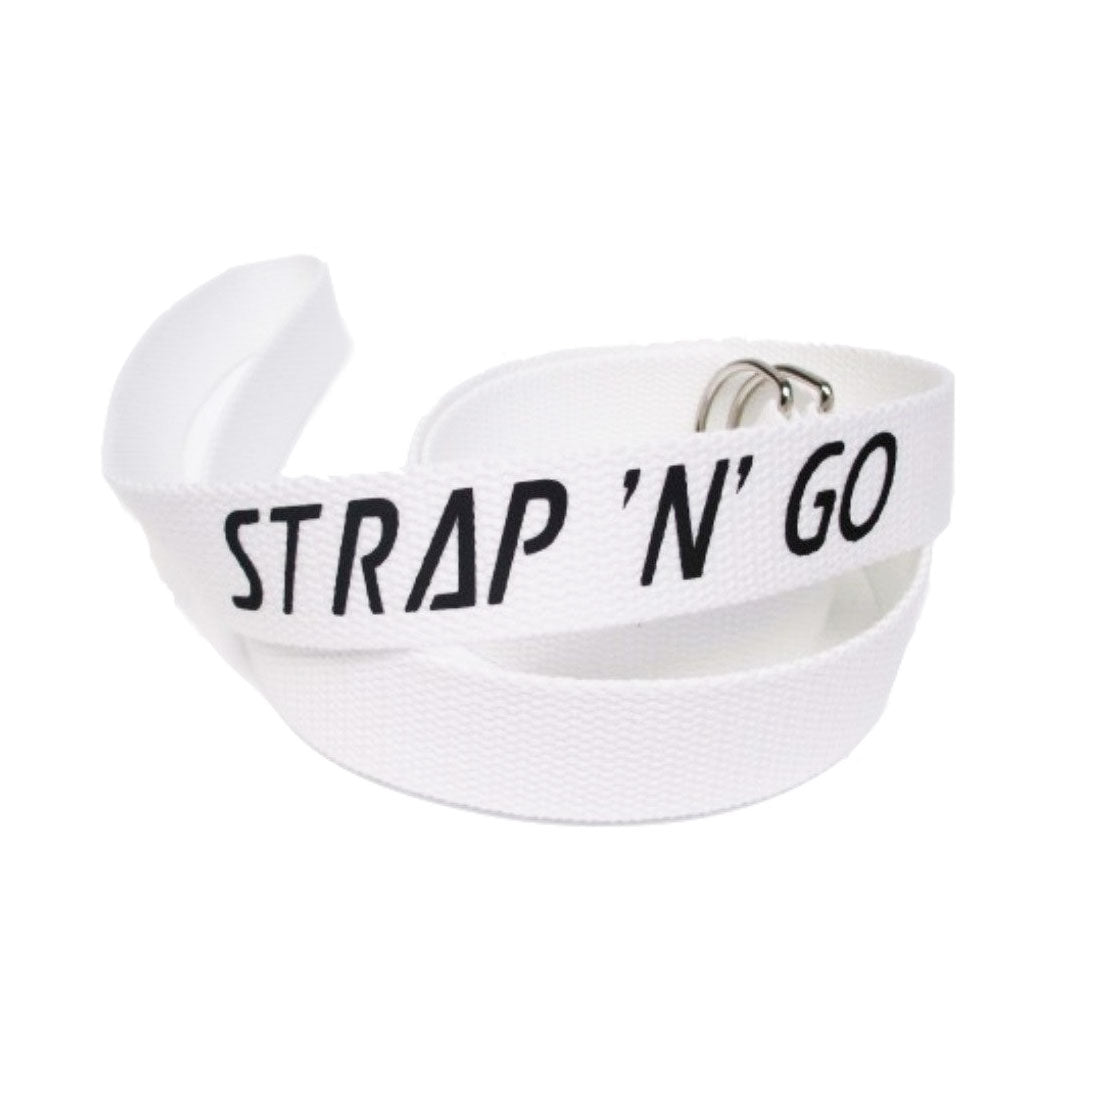 Strap N Go Skate Noose/Leash - Solid Colours White Roller Skate Accessories